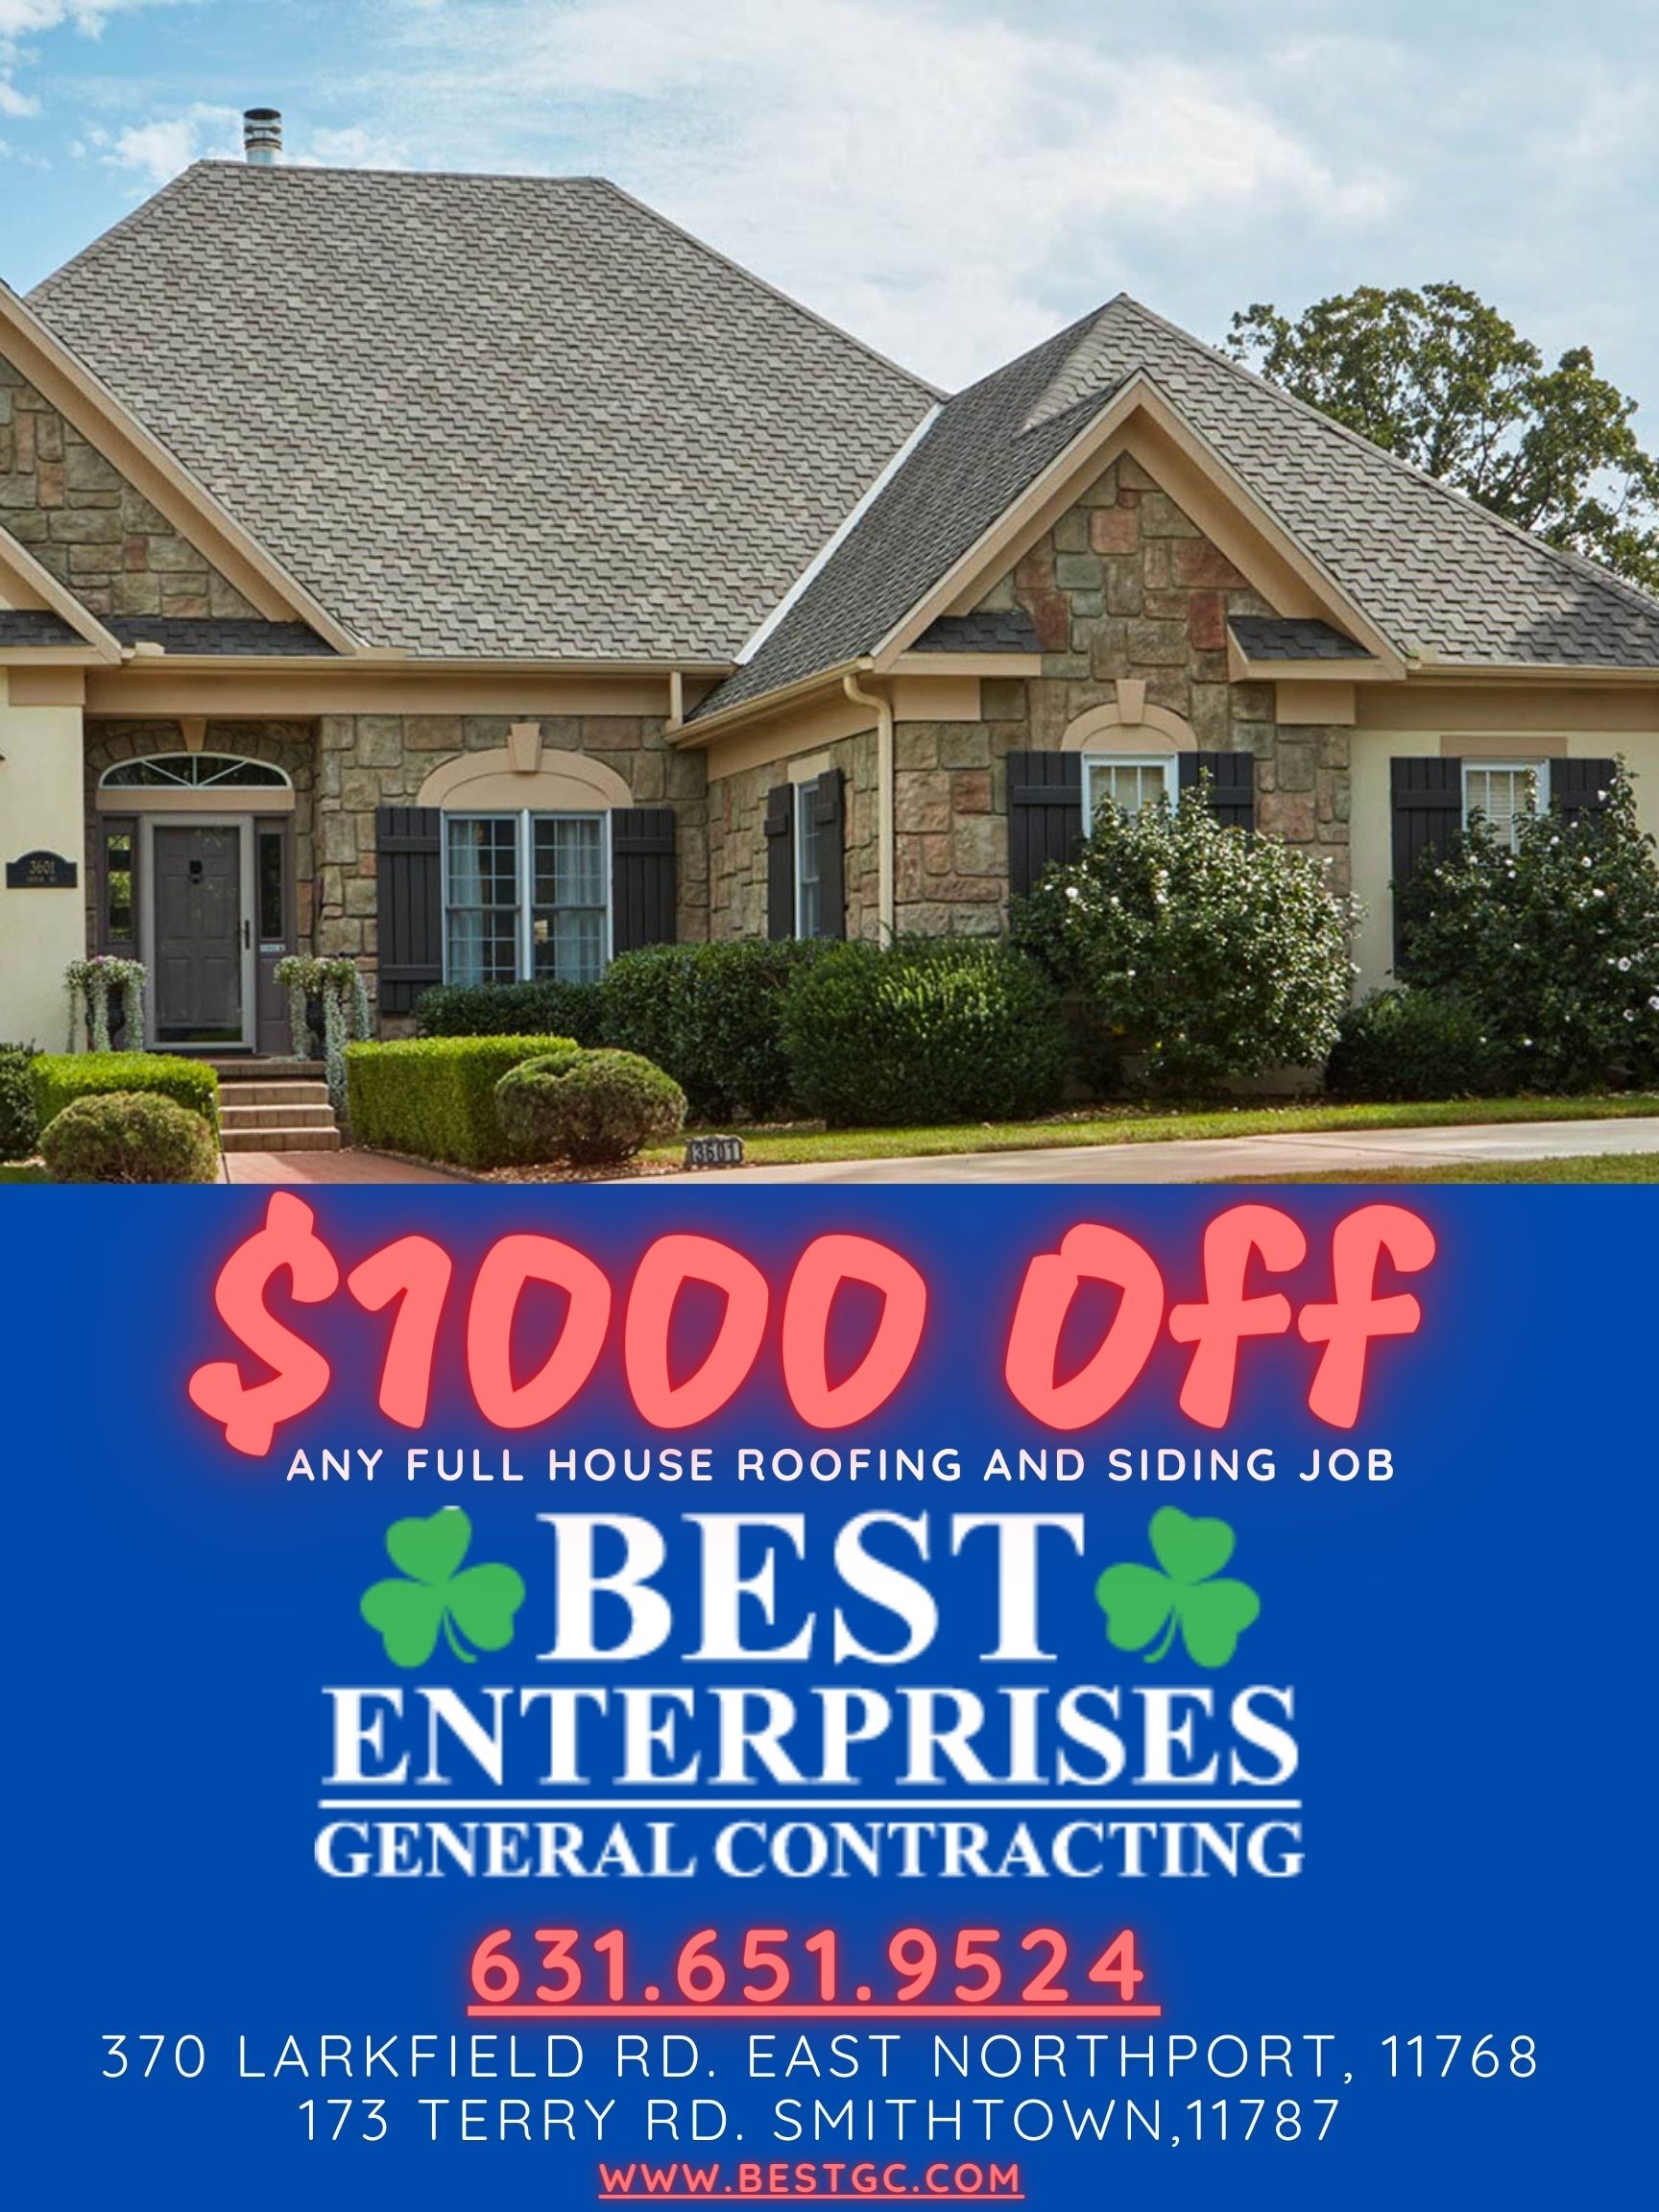 An advertisement for best enterprises general contracting with a picture of a house